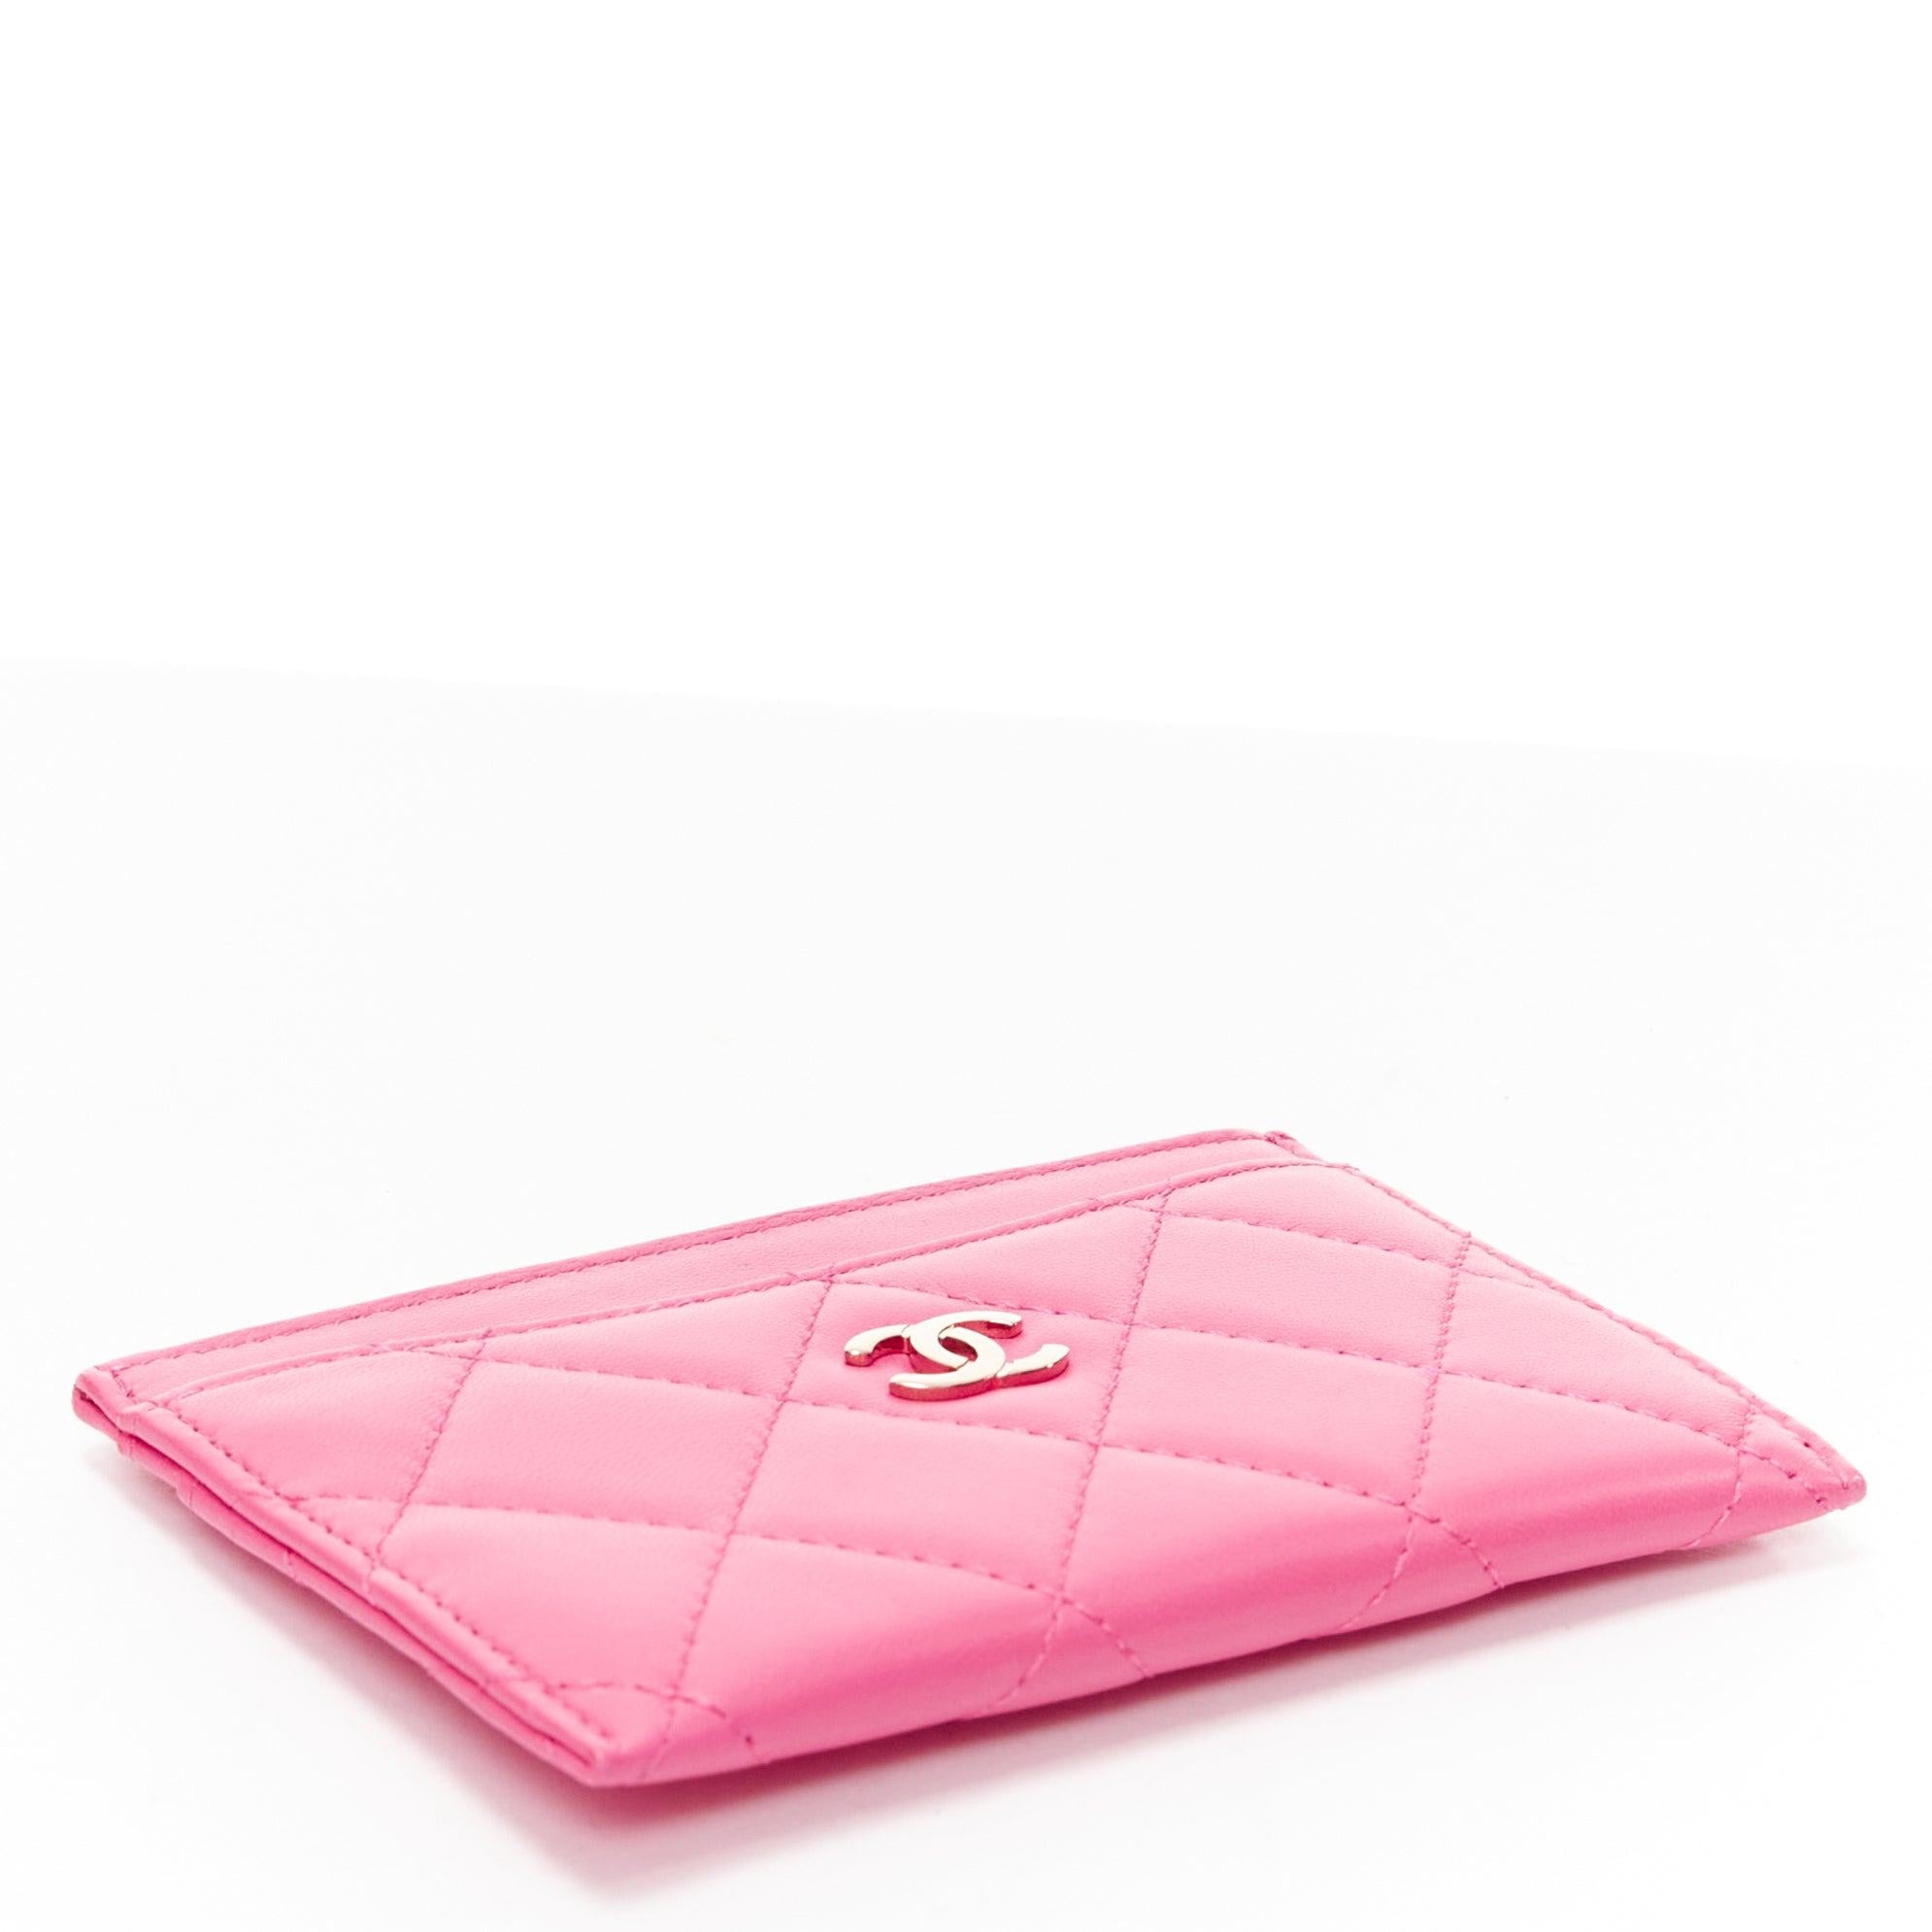 Women's CHANEL bright pink smooth leather CC logo quilted cardholder For Sale